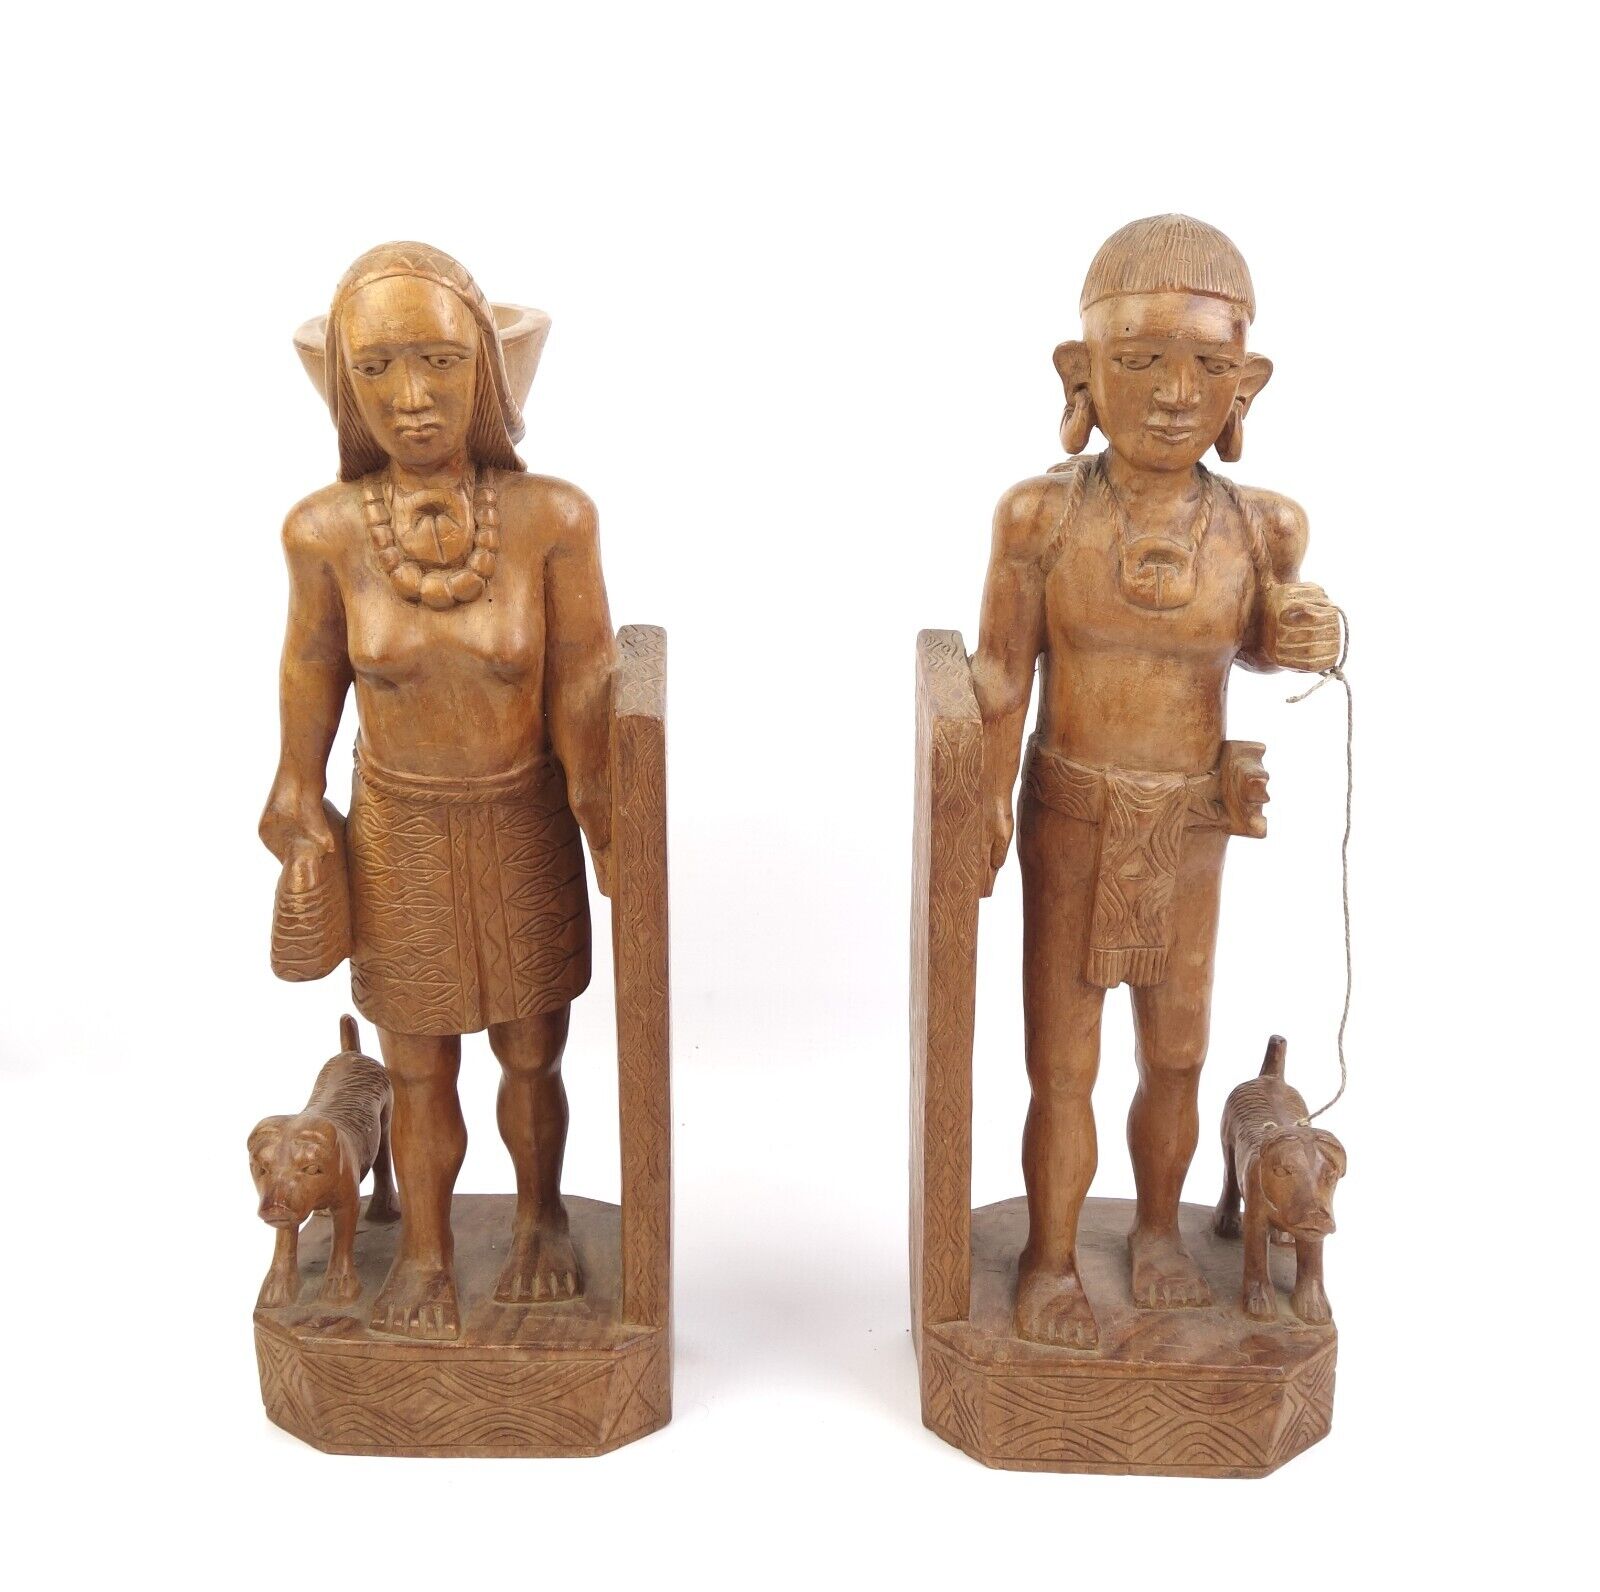 VTG Mid Century Hand Carved Wood Figural Bookends Igorot Vintage Philippines